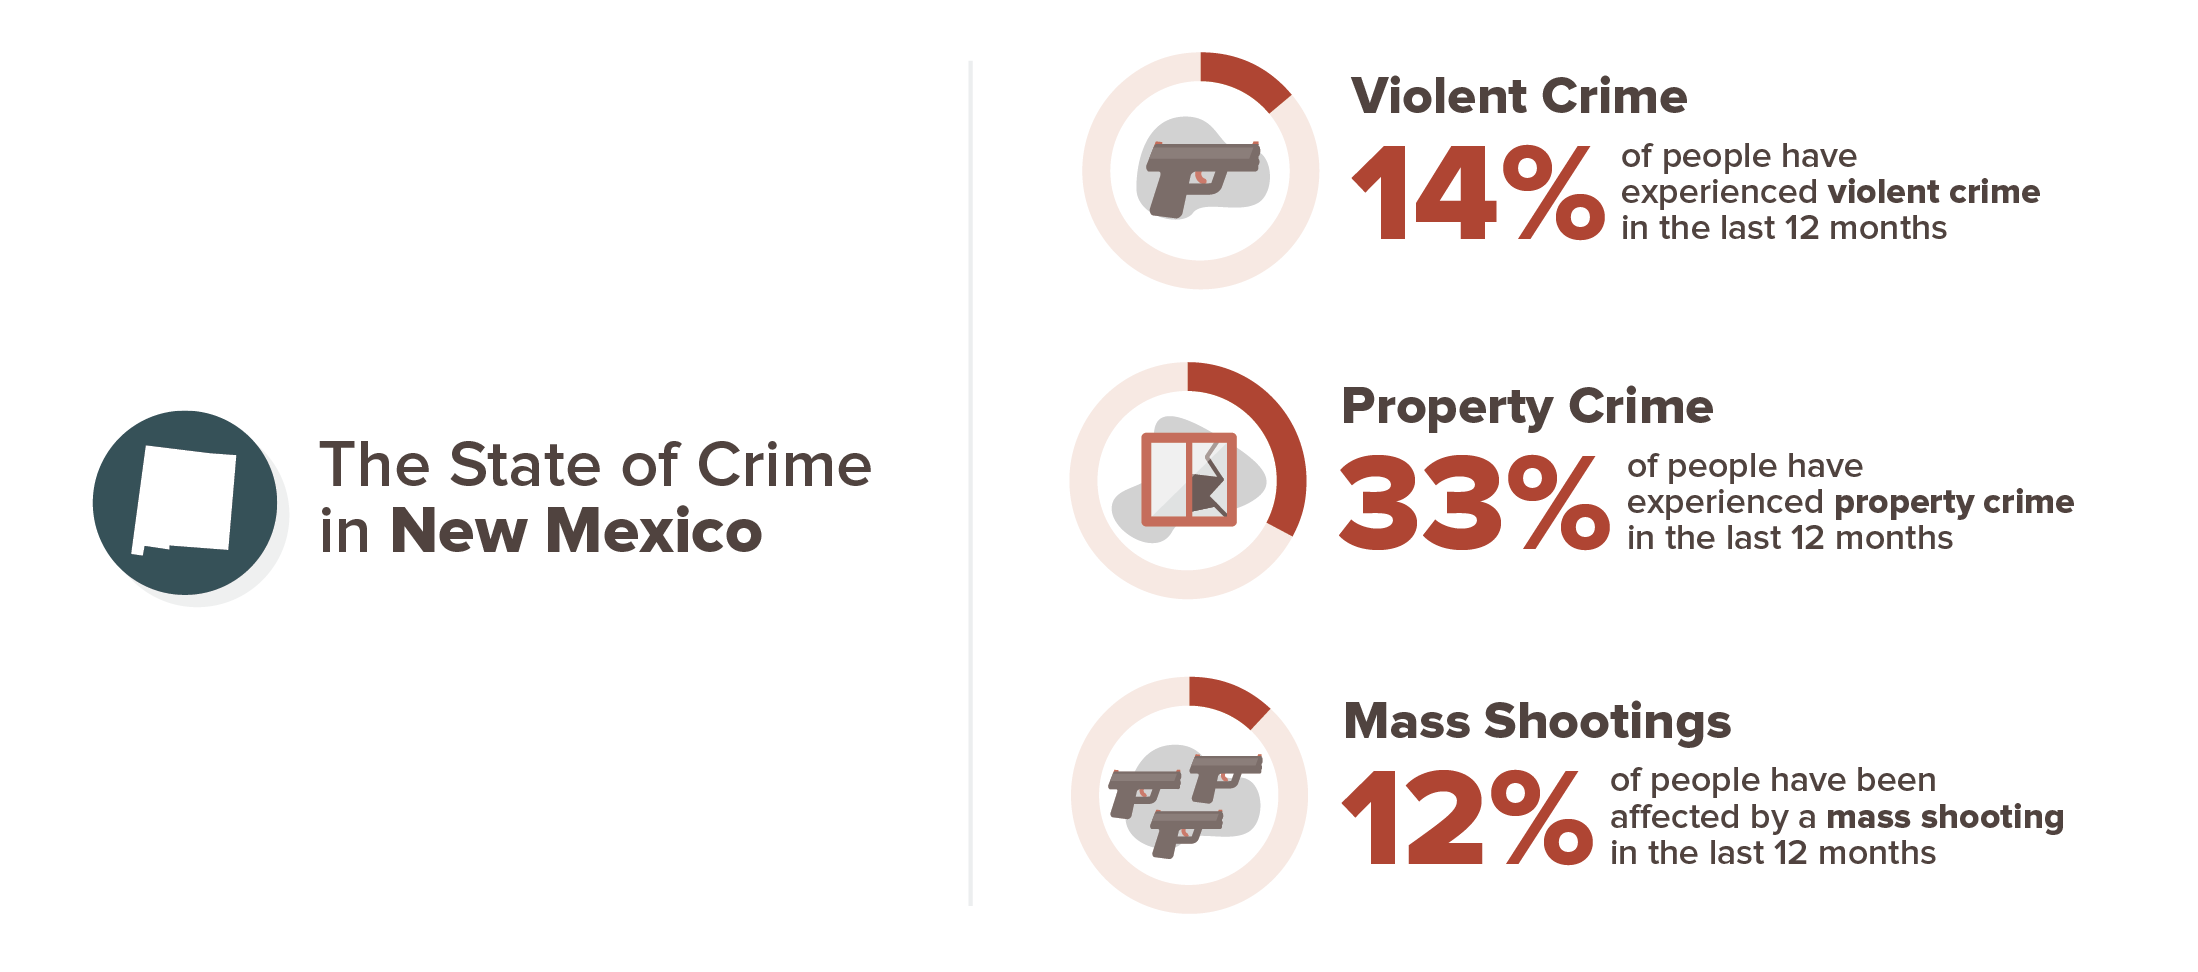 New Mexico crime stats infographic